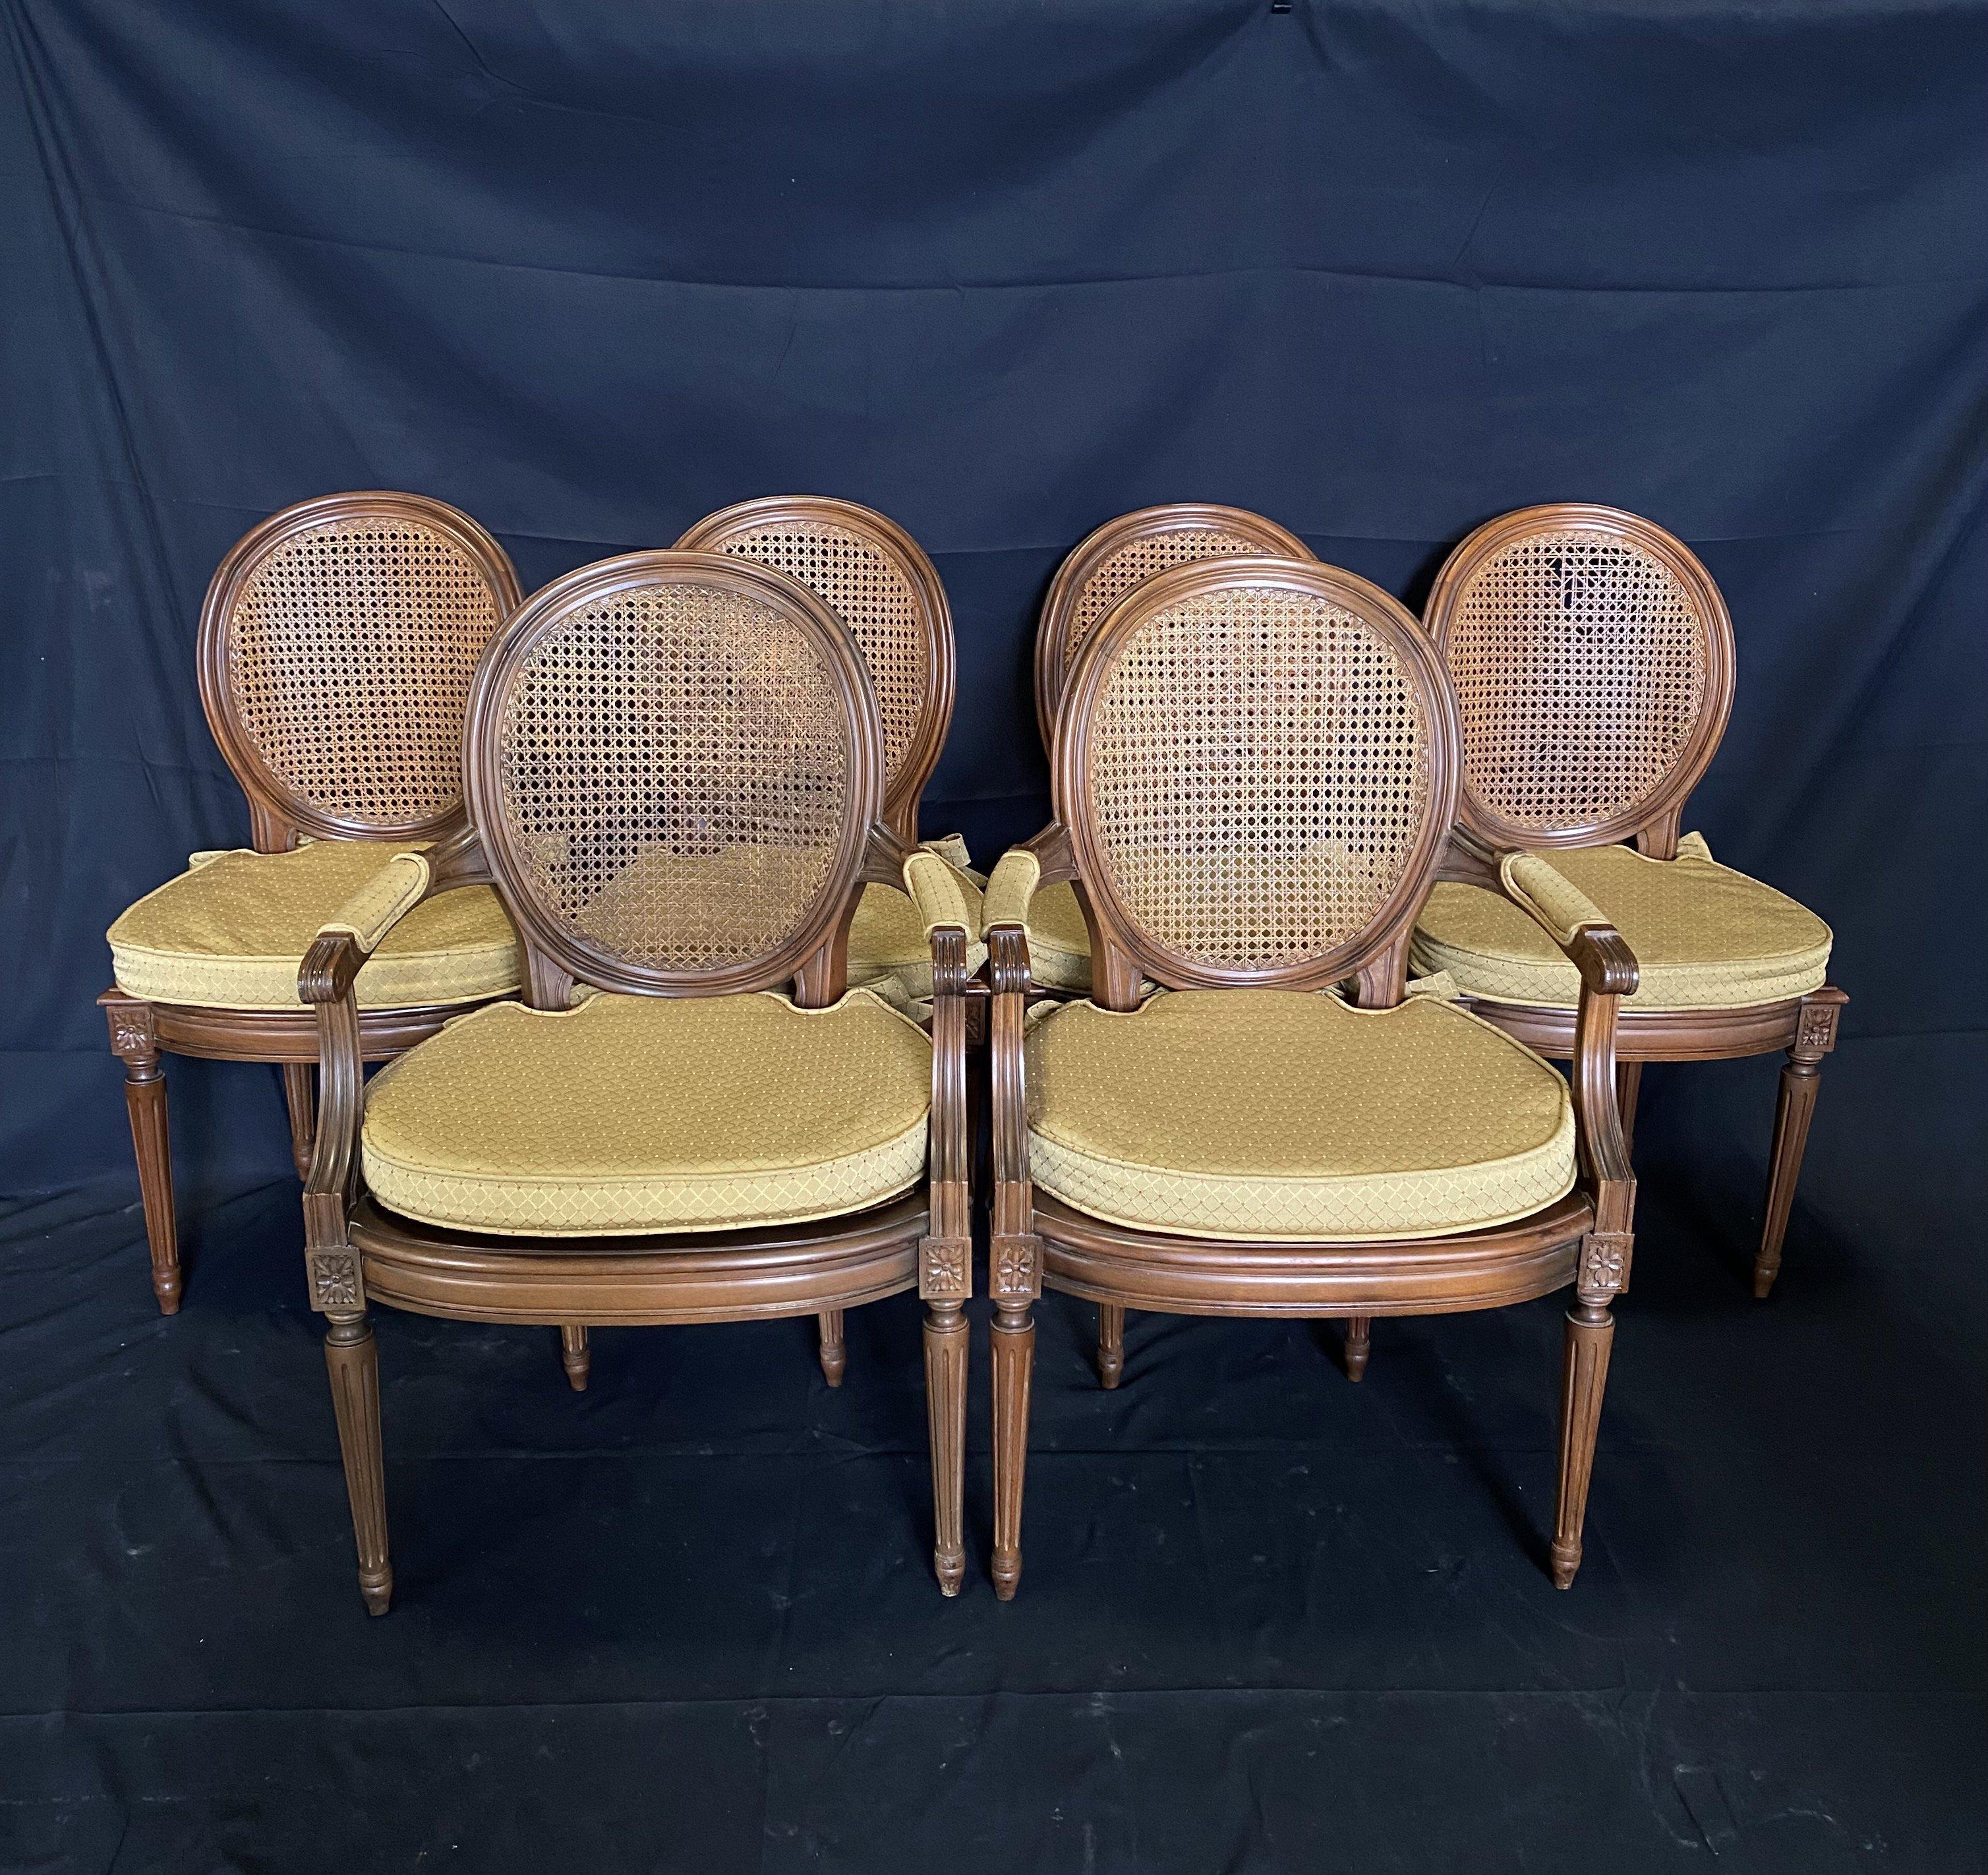 A lovely set of six French Louis XVI style chairs, comprised of four side and two arm chairs. Lovely original caning complemented with neutral seat cushions. Reeded tapered legs and carved floral embellishments on top. Entire chair is carved with